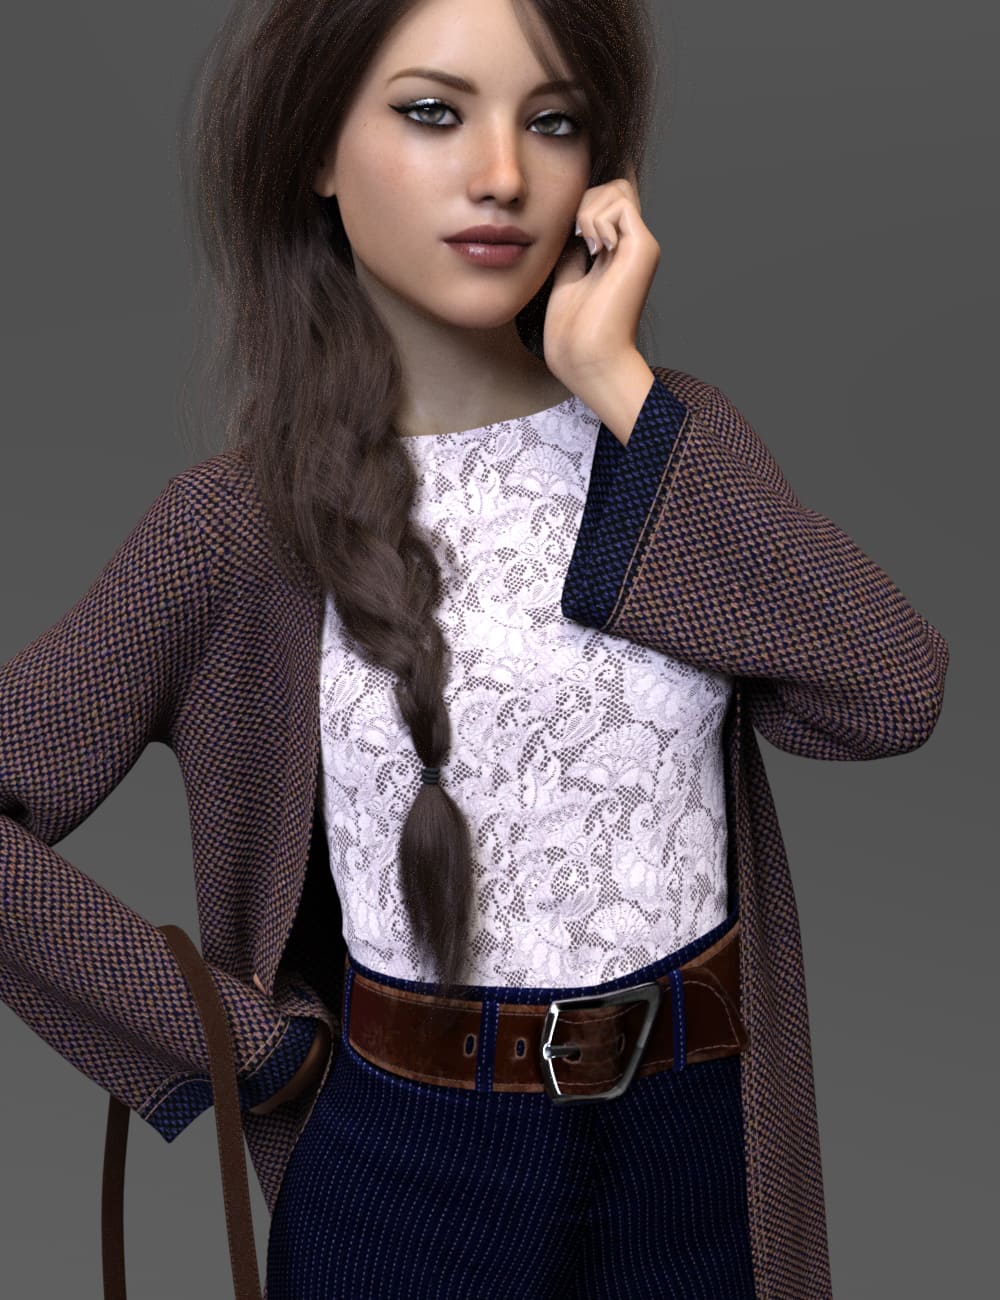 dForce Iconic Style Outfit Textures_DAZ3D下载站